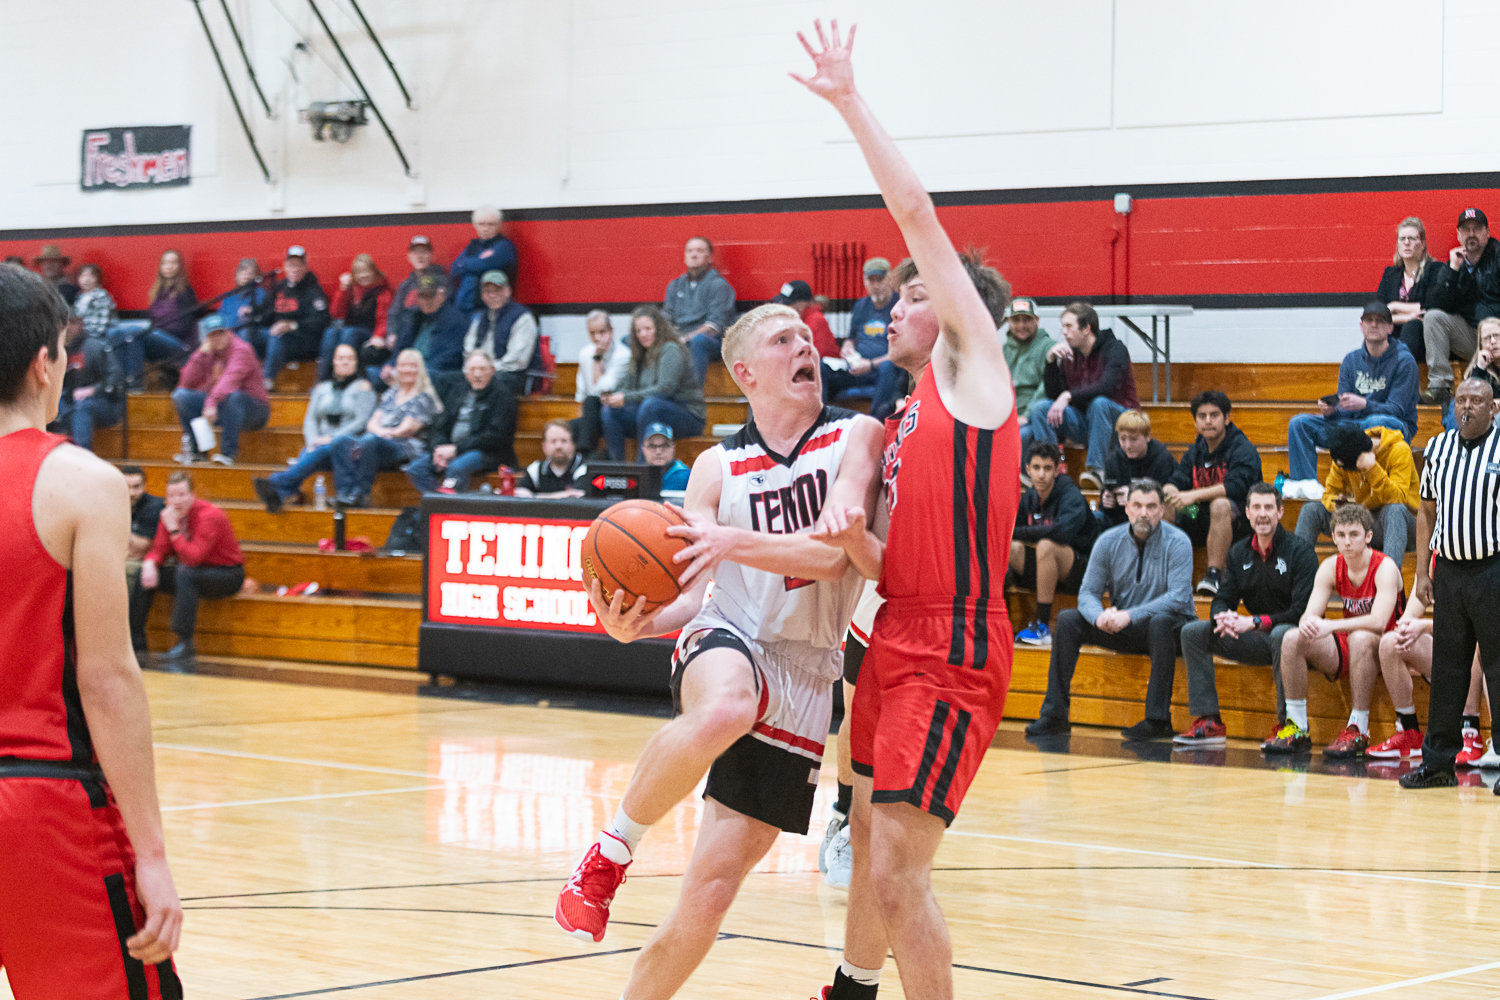 Austin Gonia draws contact going to the hoop during the first half of Tenino's 65-46 win over Mossyrock on Jan. 18.